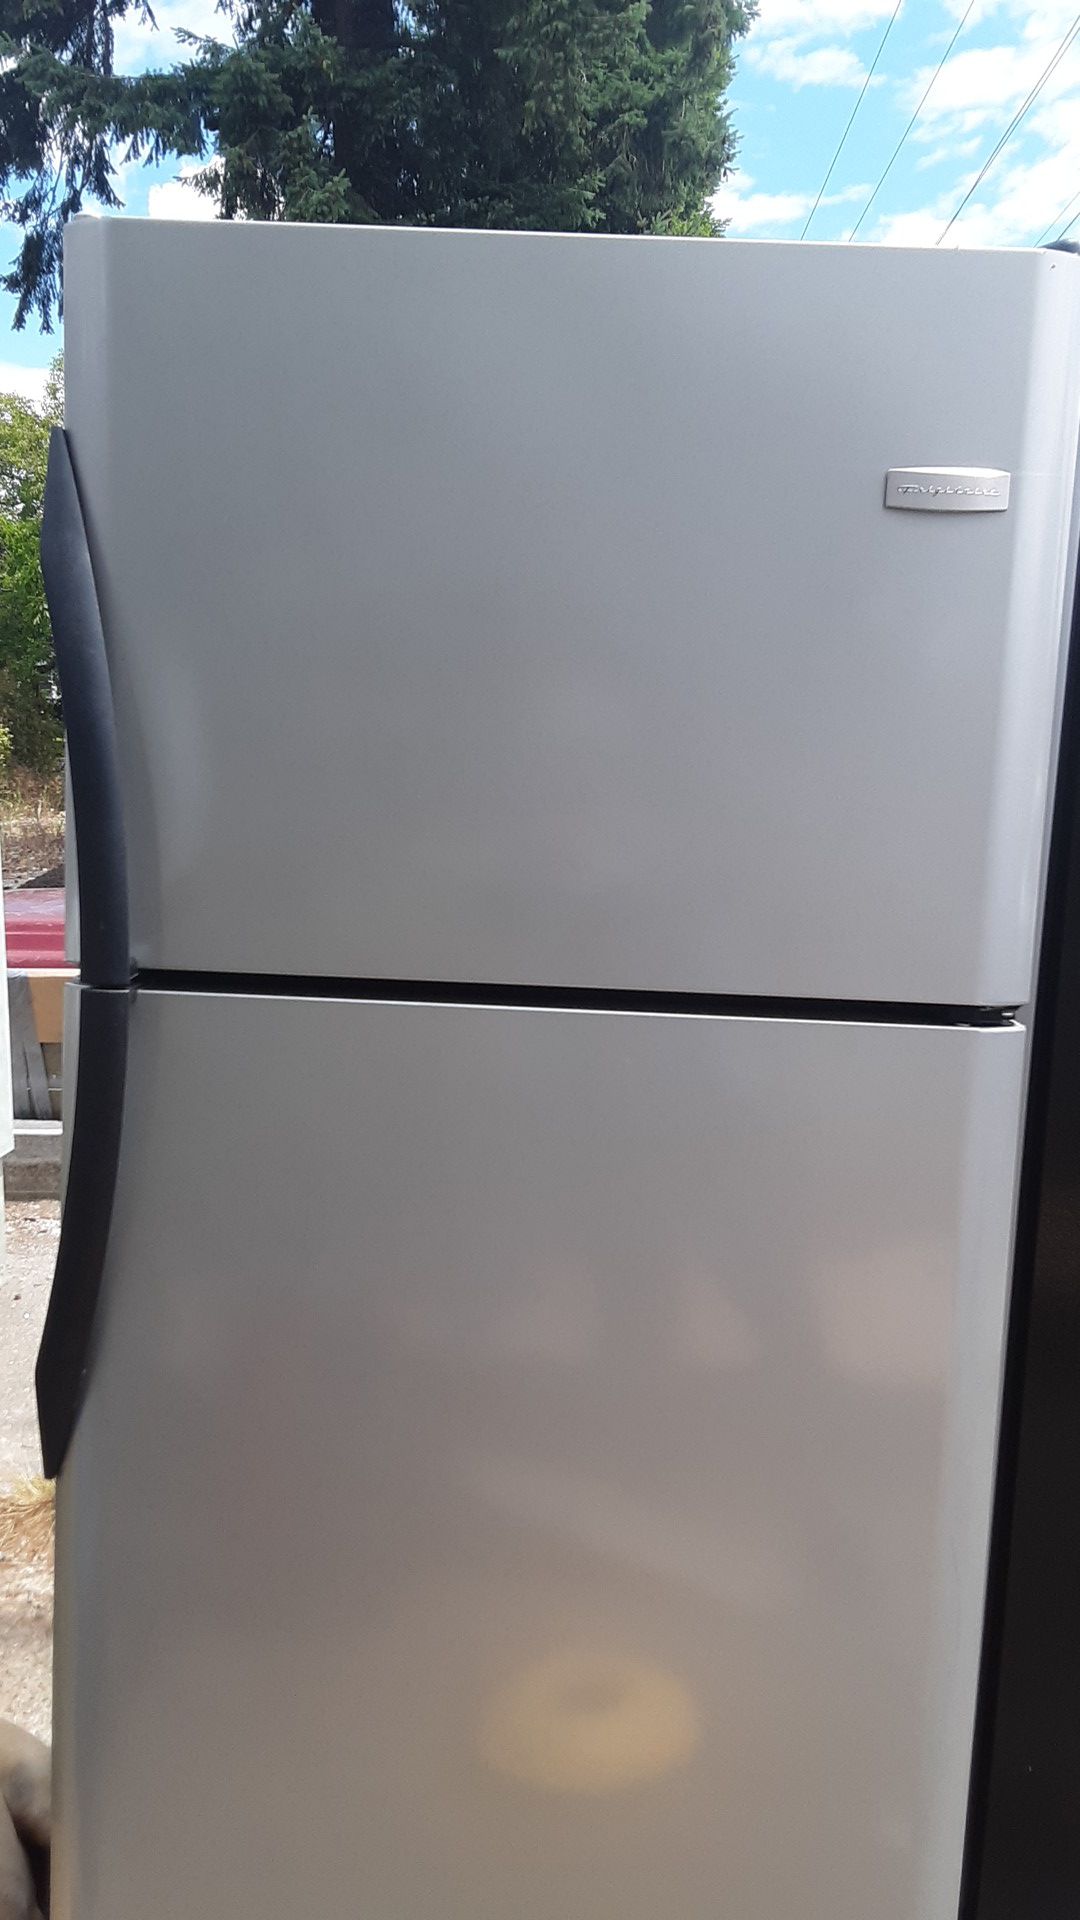 Frigidaire stand up stainless fridge and freezer